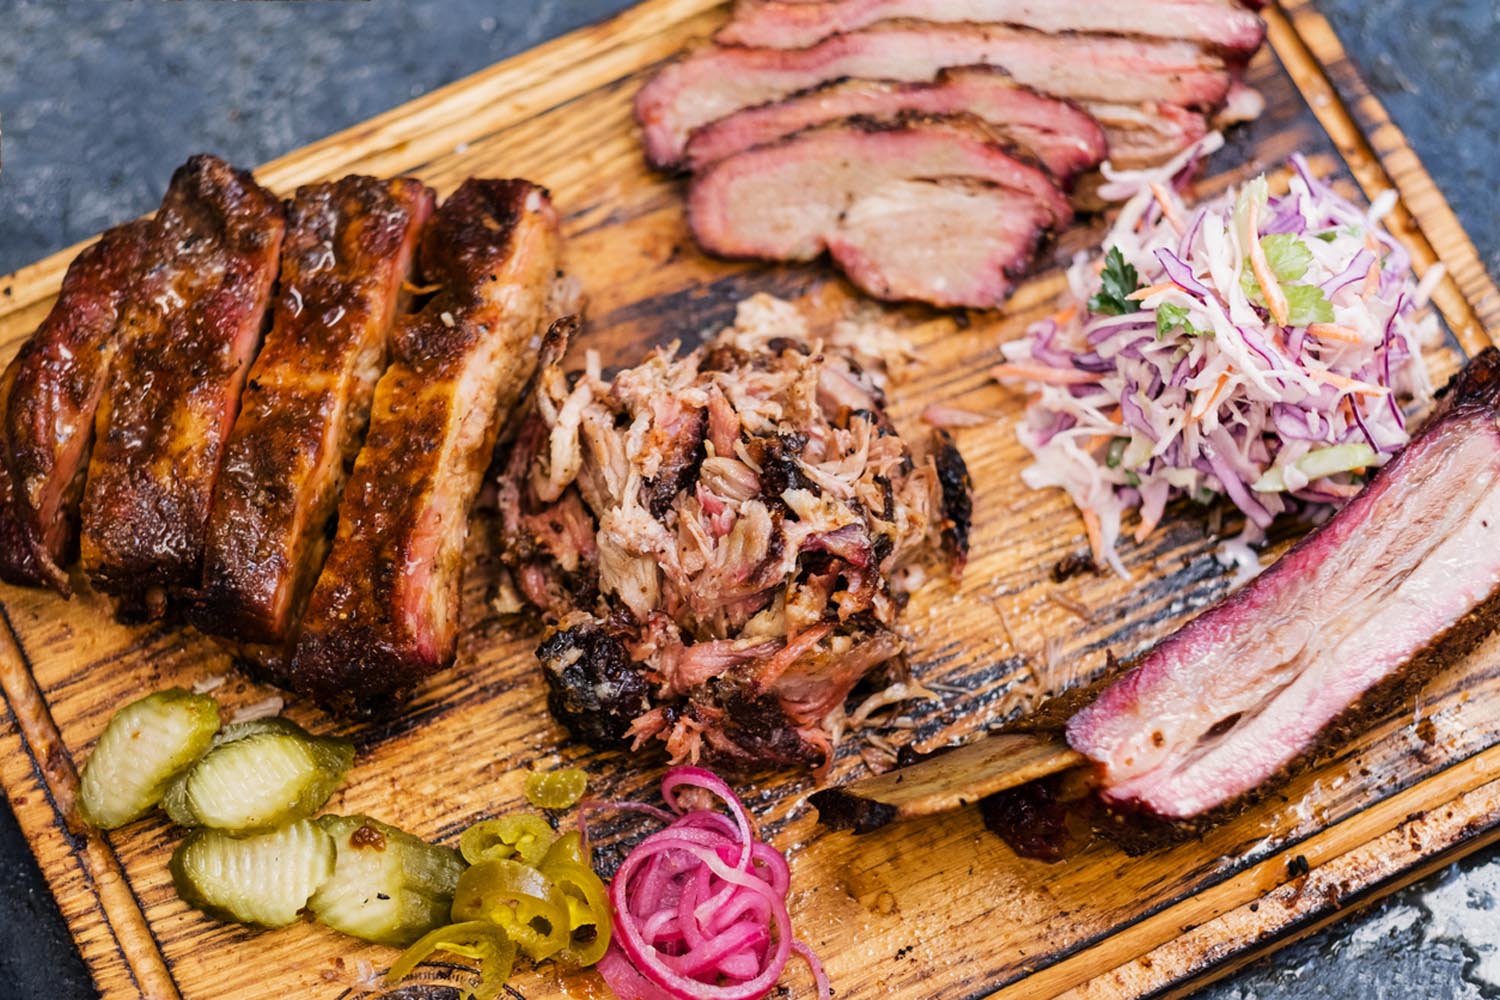 Where You Can Find The Best Barbecue in Dallas